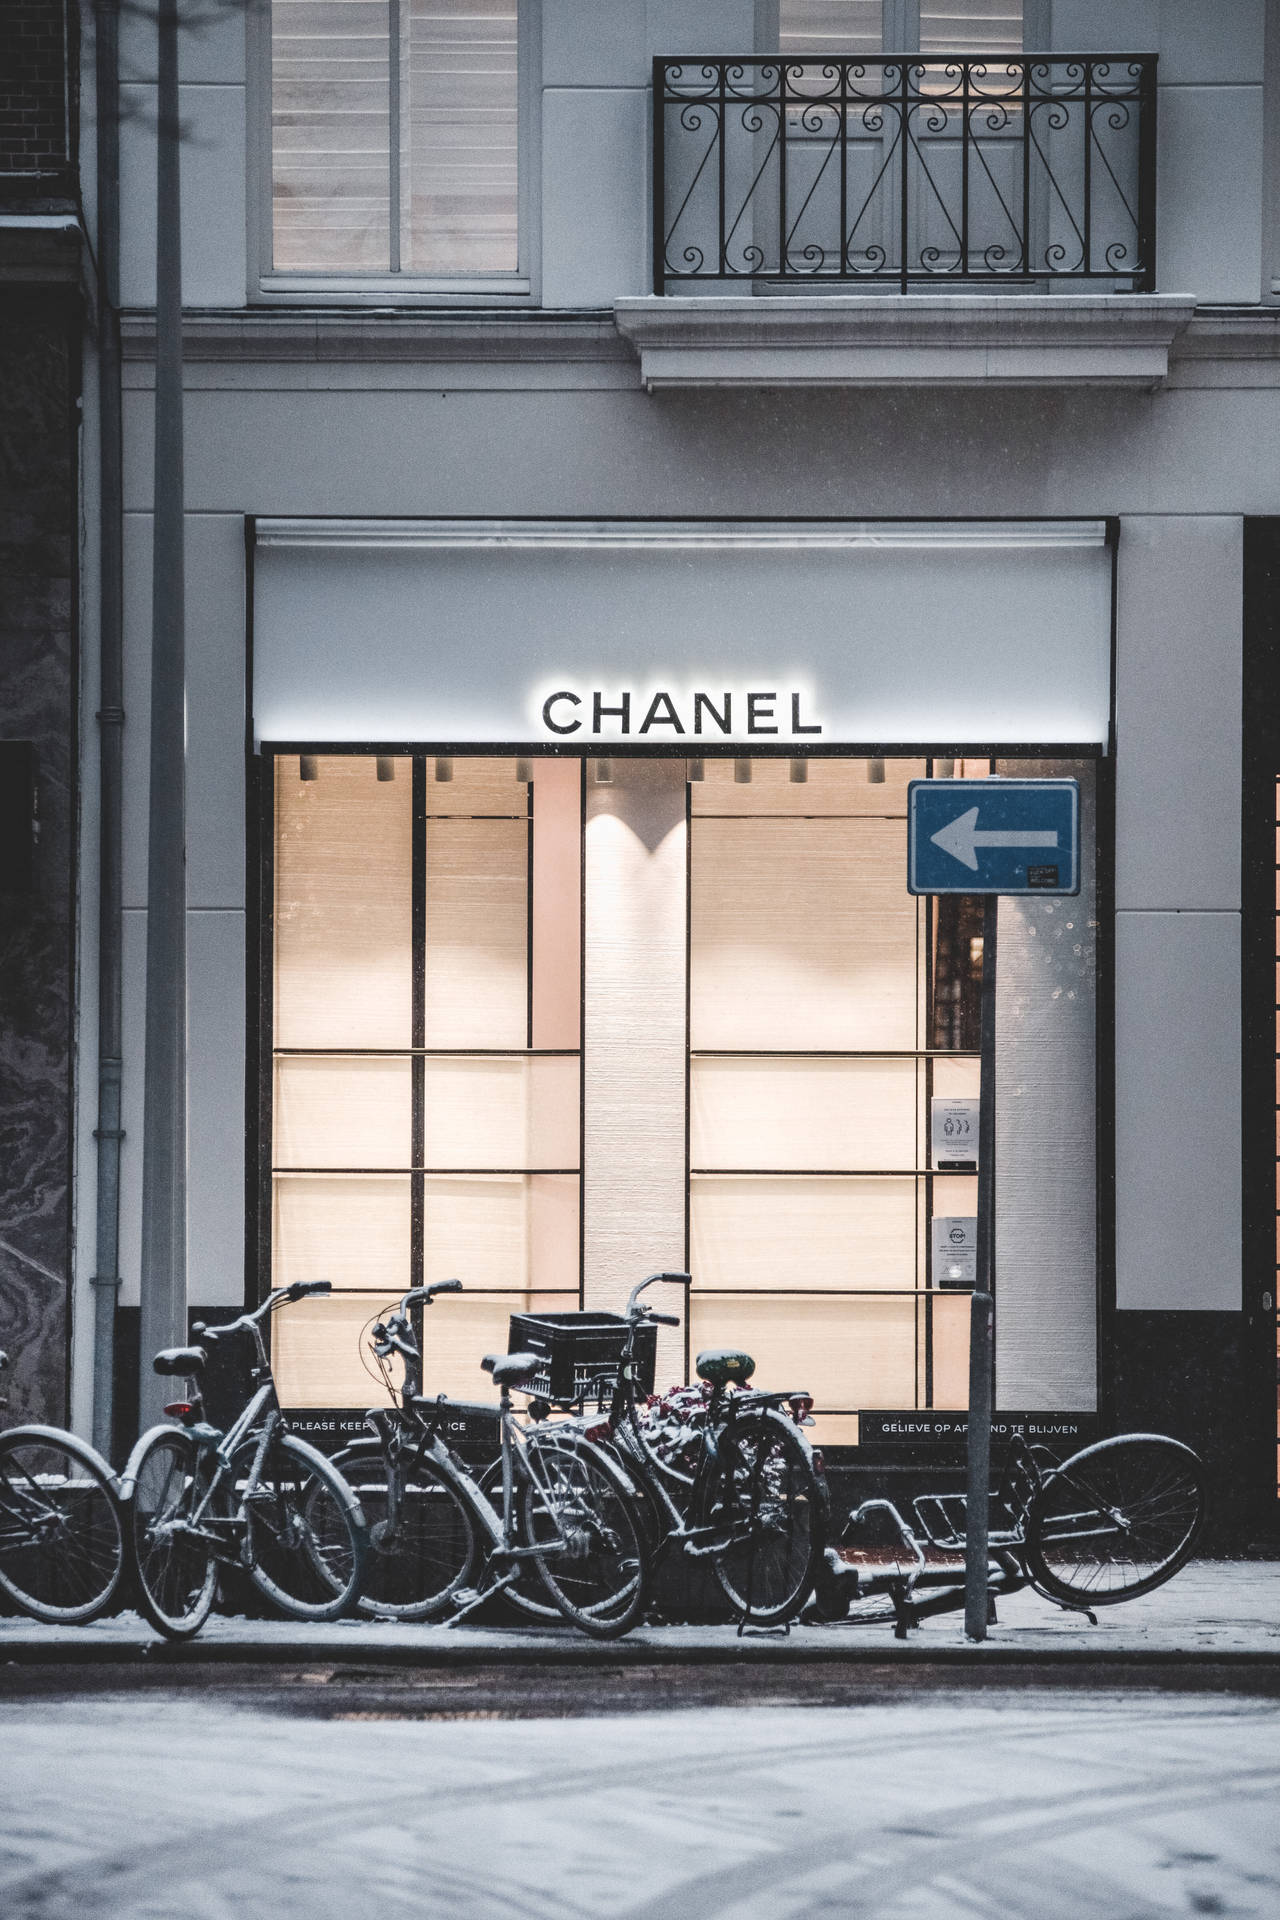 Chanel Store With Amsterdam Bicycles